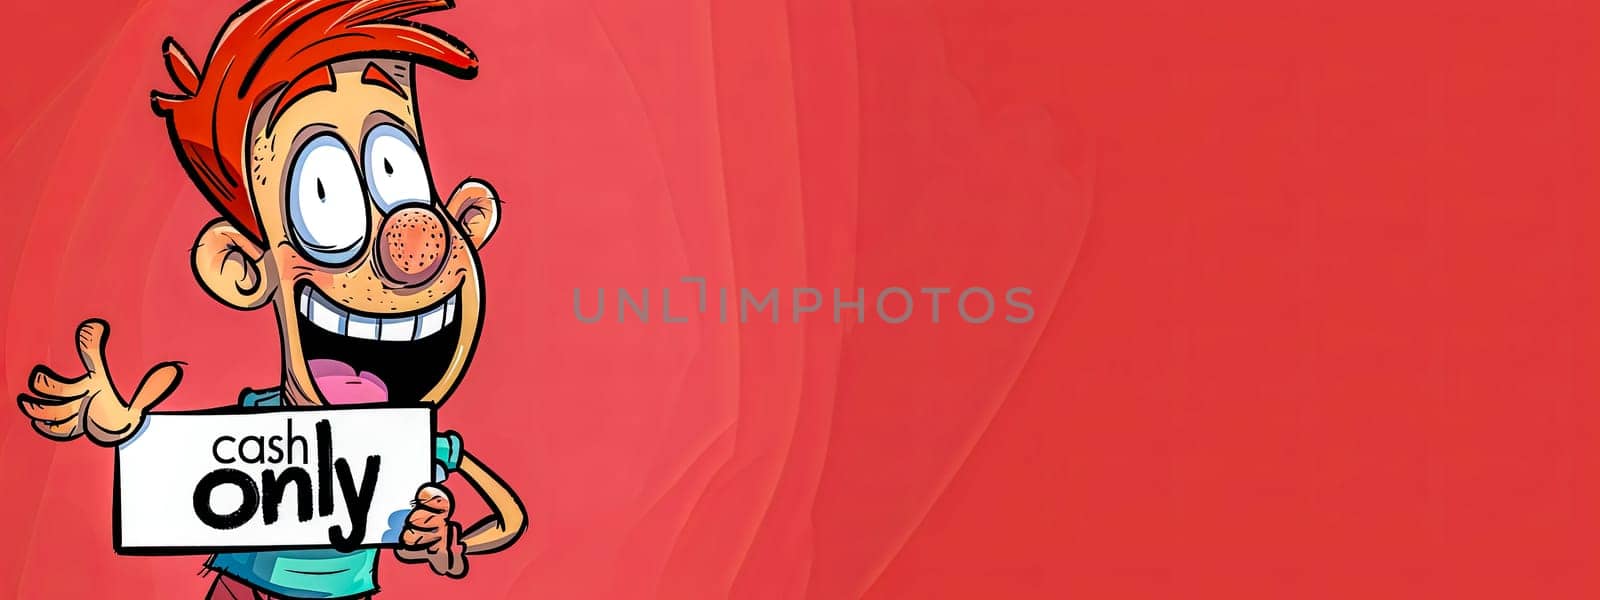 Vibrant cartoon illustration of a smiling character with a 'cash only' sign on a red background